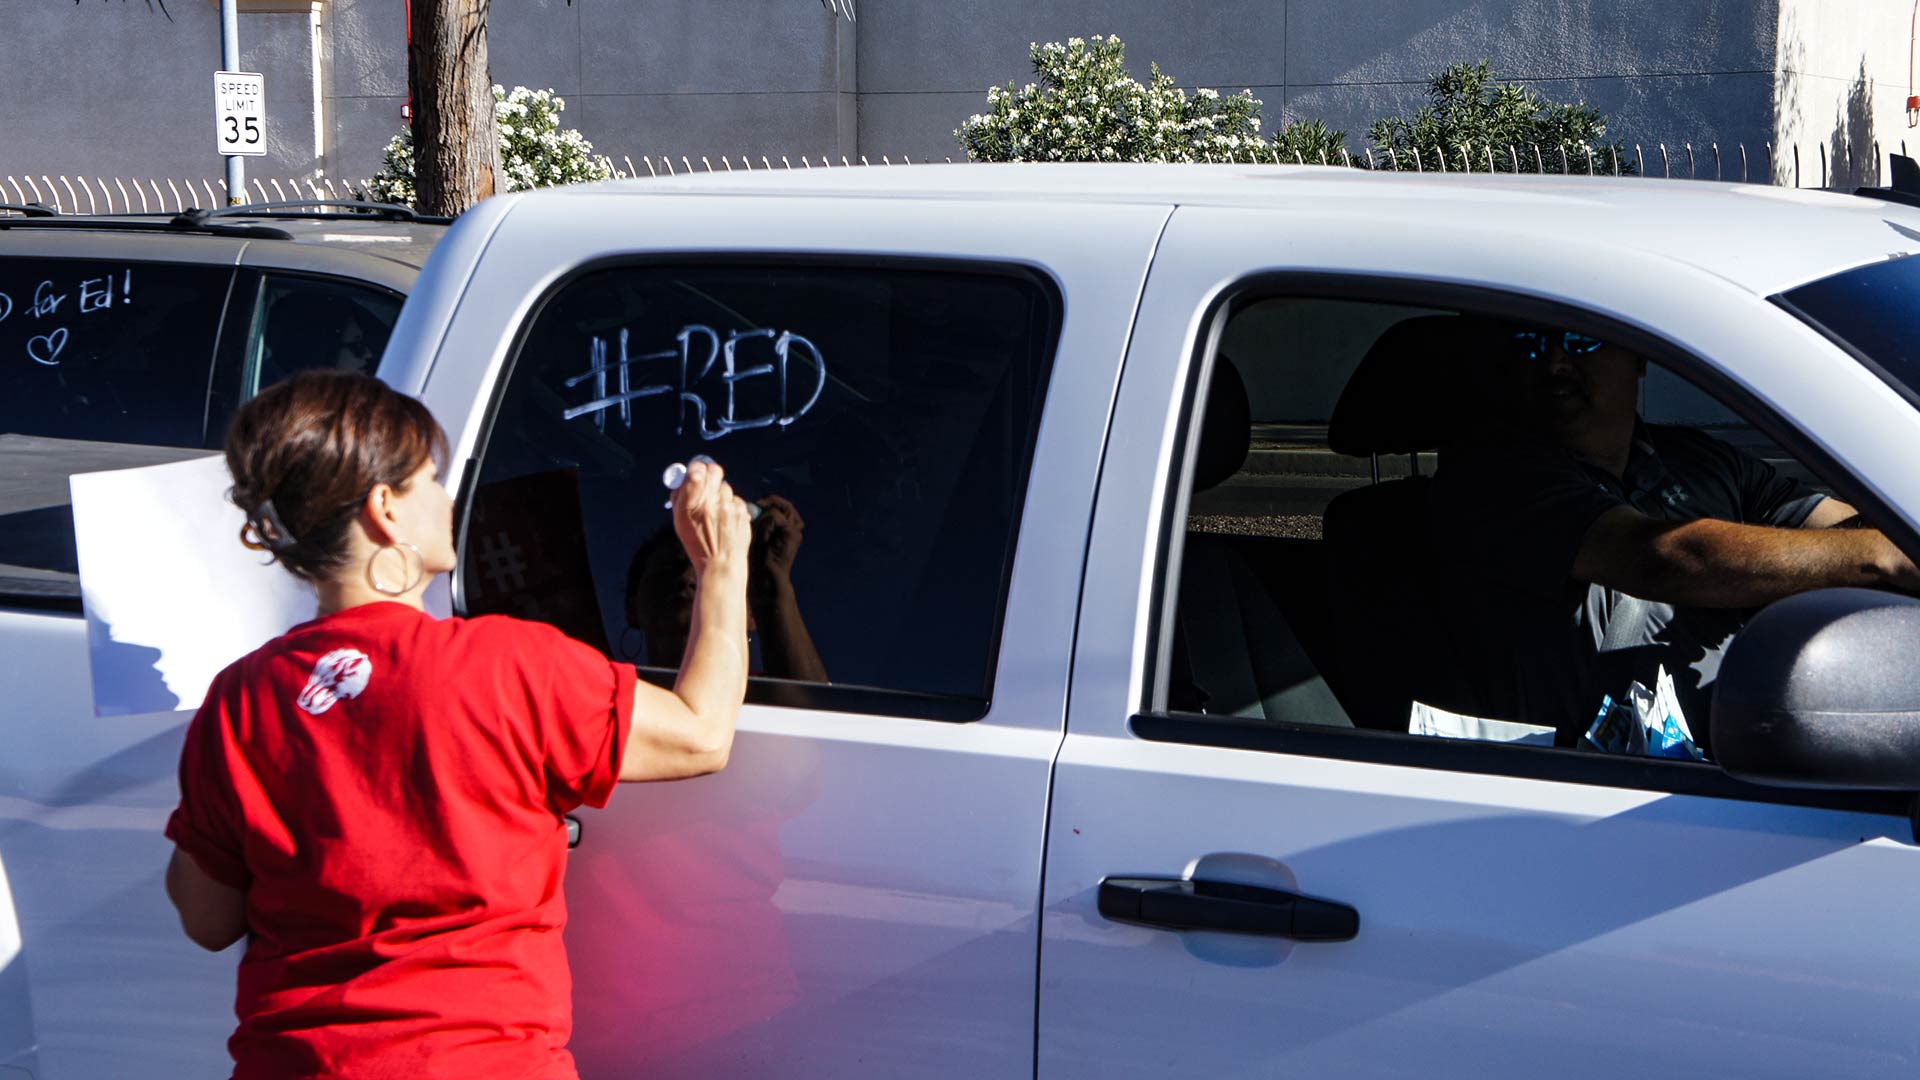 A demonstrator on Tucson's west side writes #RedForEd on the car windows of drivers sympathetic to the movement for education funding, April 24.